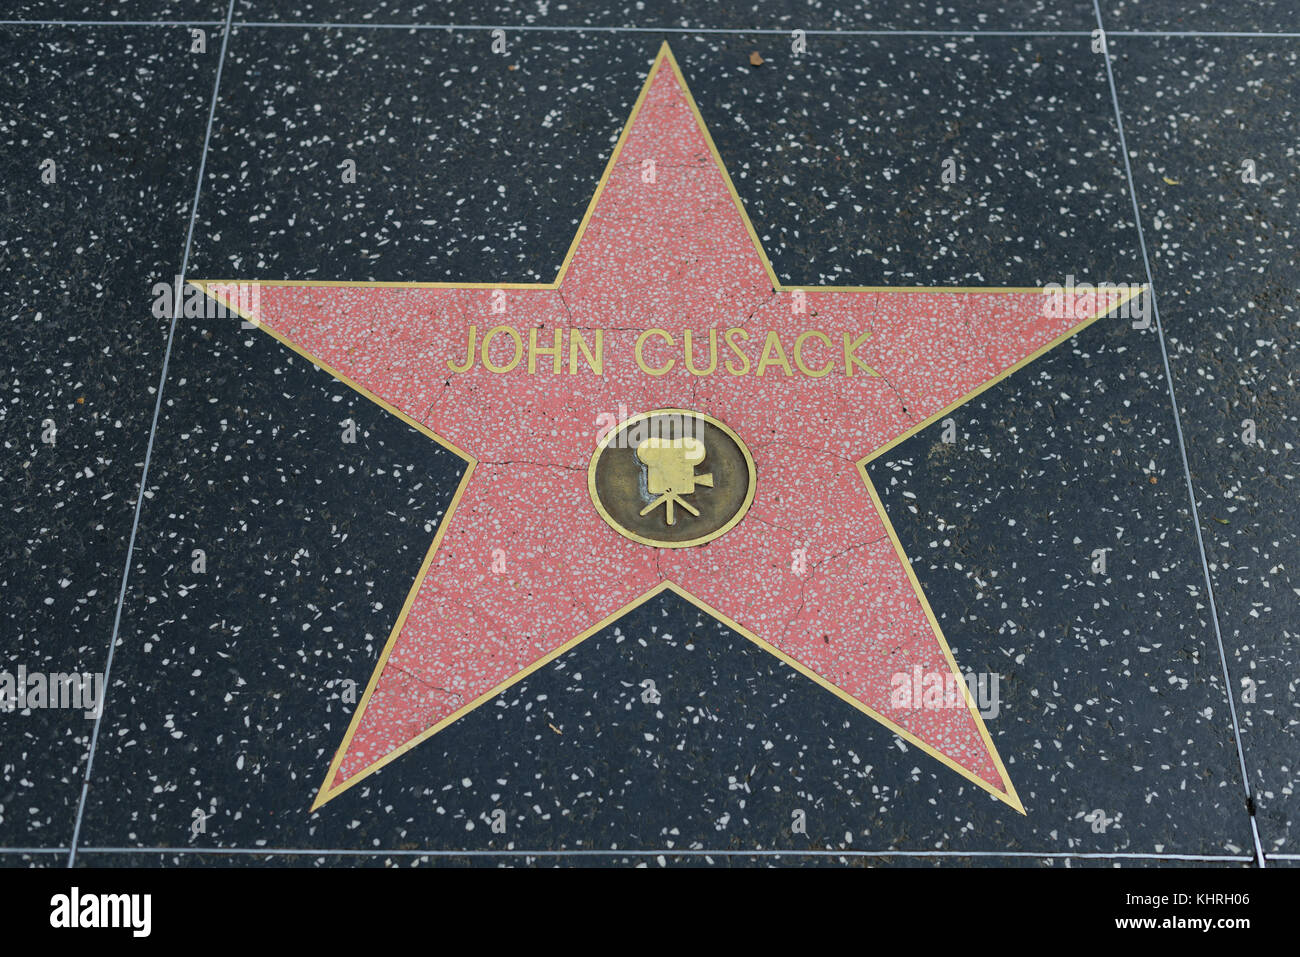 HOLLYWOOD, CA - DECEMBER 06: John Cusack star on the Hollywood Walk of Fame in Hollywood, California on Dec. 6, 2016. Stock Photo